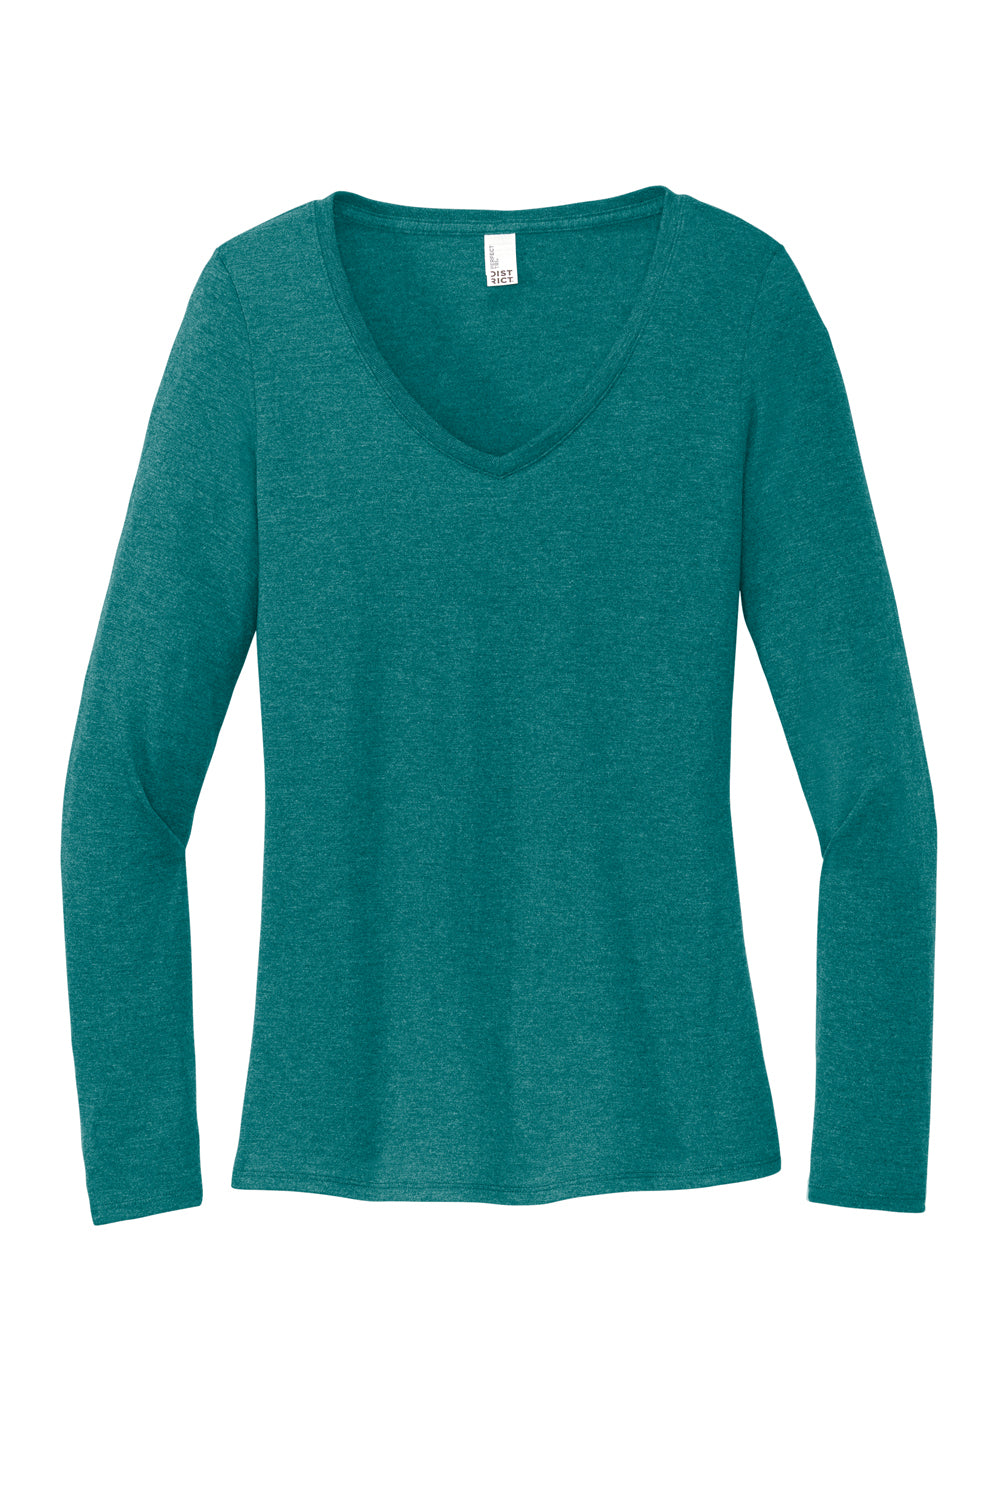 District DT135 Womens Perfect Tri Long Sleeve V-Neck T-Shirt Heather Teal Green Flat Front